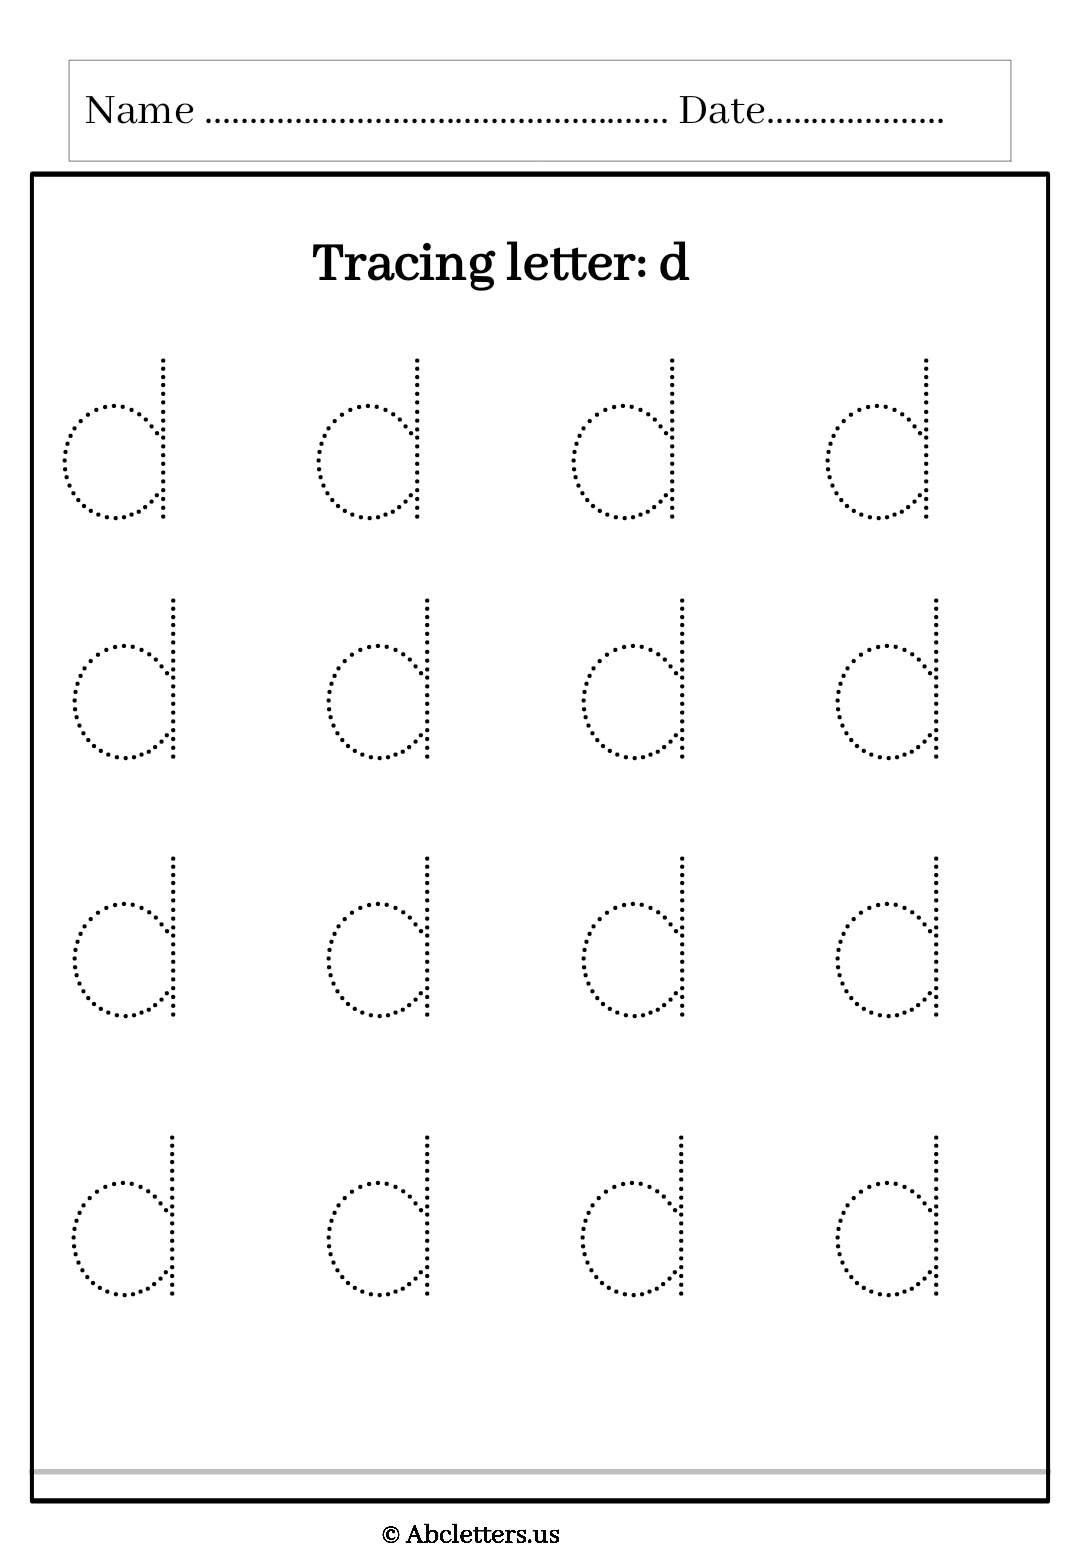 Tracing letter lowercase d